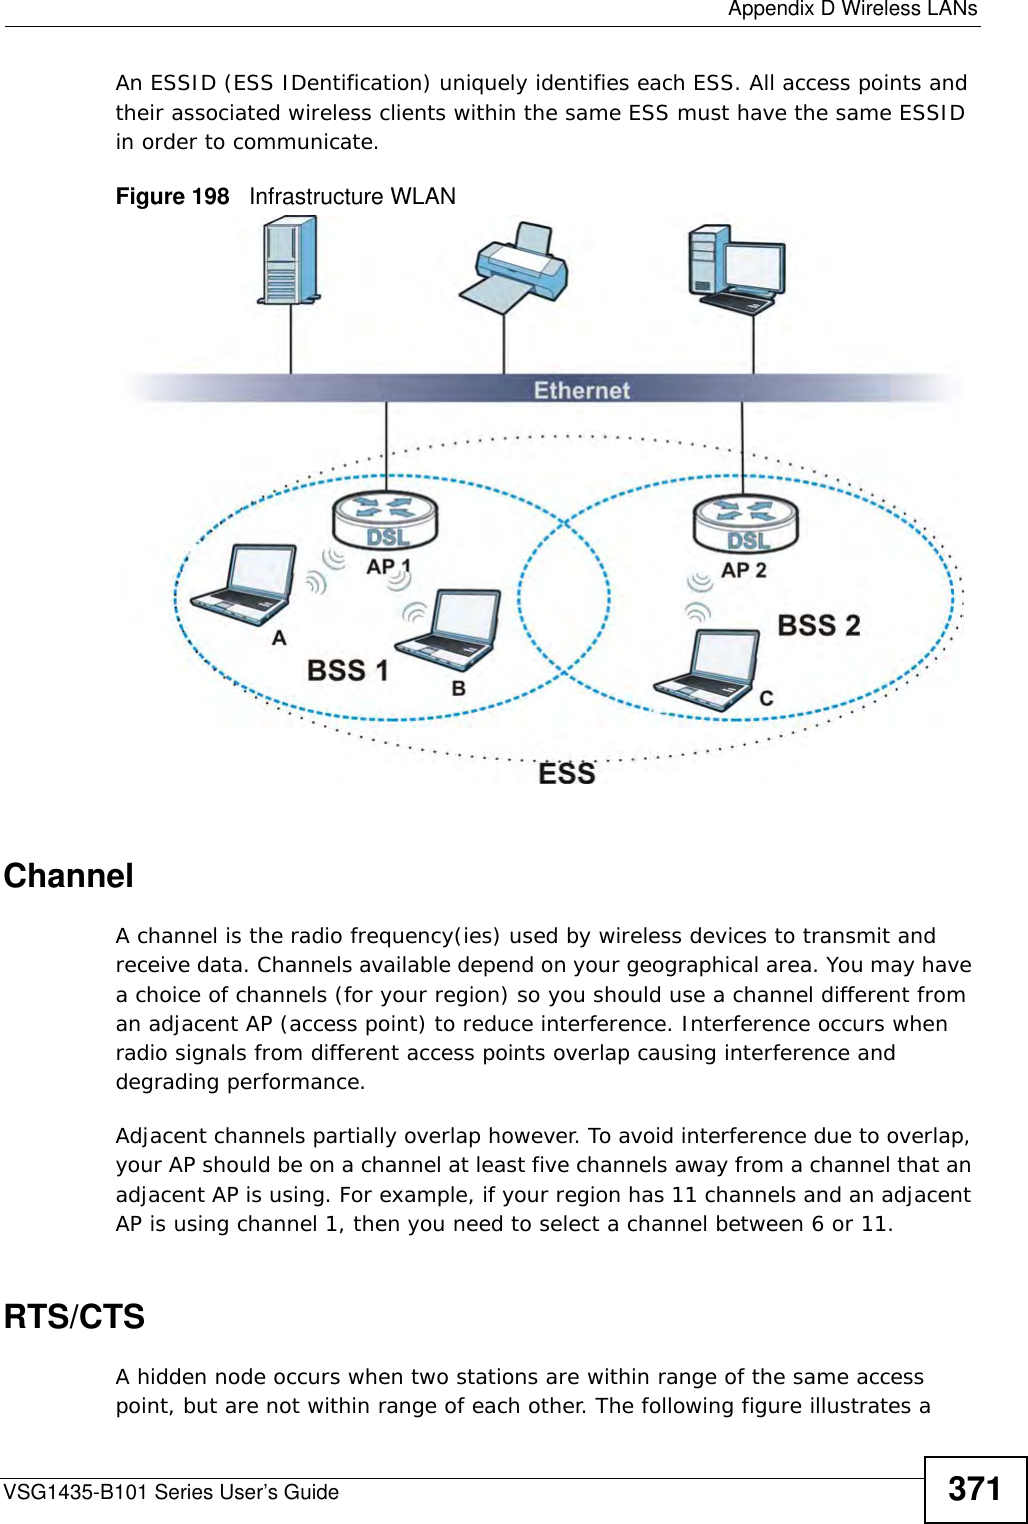  Appendix D Wireless LANsVSG1435-B101 Series User’s Guide 371An ESSID (ESS IDentification) uniquely identifies each ESS. All access points and their associated wireless clients within the same ESS must have the same ESSID in order to communicate.Figure 198   Infrastructure WLANChannelA channel is the radio frequency(ies) used by wireless devices to transmit and receive data. Channels available depend on your geographical area. You may have a choice of channels (for your region) so you should use a channel different from an adjacent AP (access point) to reduce interference. Interference occurs when radio signals from different access points overlap causing interference and degrading performance.Adjacent channels partially overlap however. To avoid interference due to overlap, your AP should be on a channel at least five channels away from a channel that an adjacent AP is using. For example, if your region has 11 channels and an adjacent AP is using channel 1, then you need to select a channel between 6 or 11.RTS/CTSA hidden node occurs when two stations are within range of the same access point, but are not within range of each other. The following figure illustrates a 